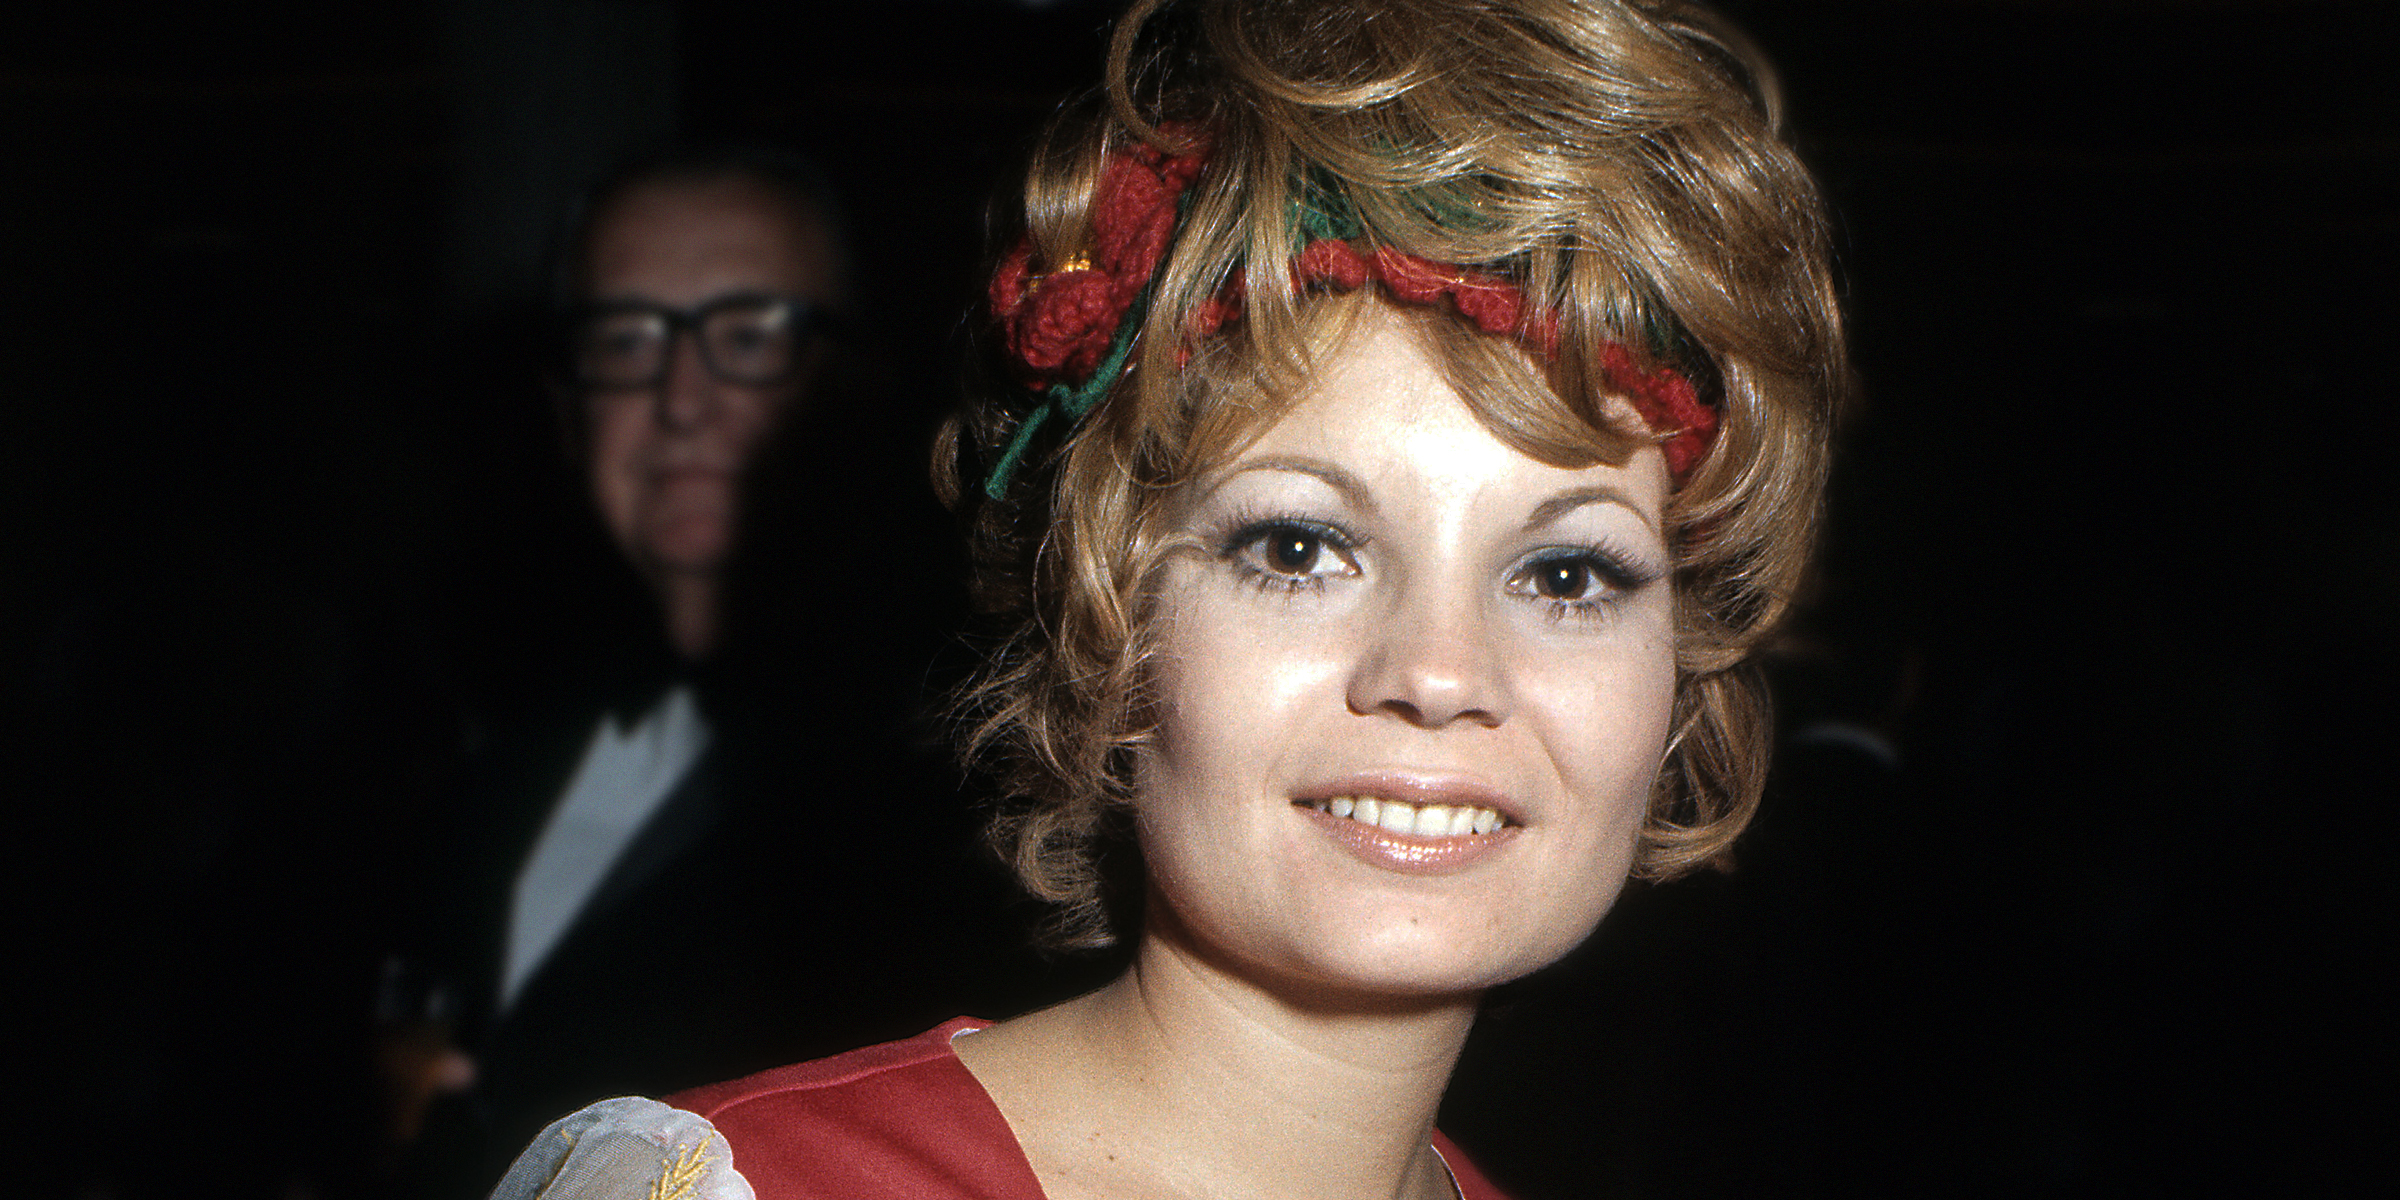 Kathy Garver | Source: Getty Images